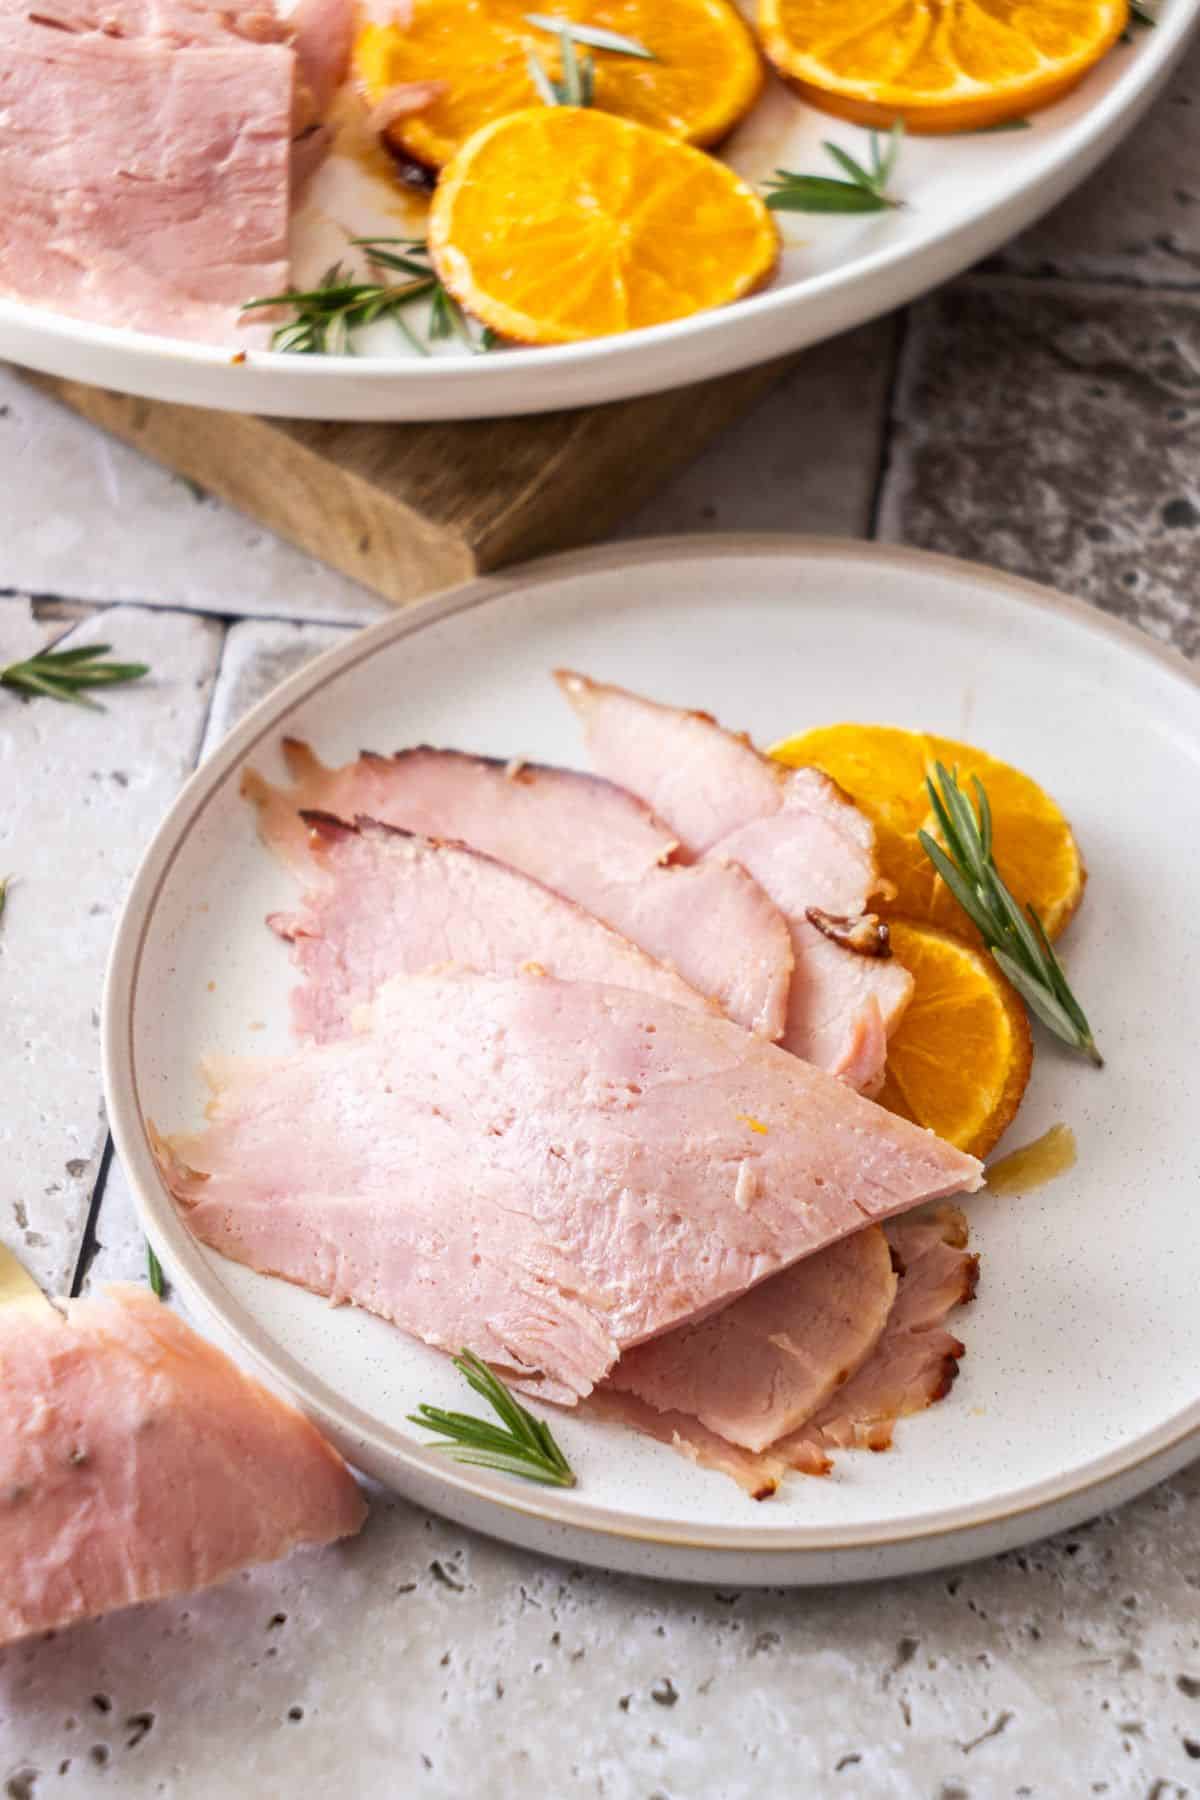 Slices of Marmalade Glazed Ham sitting on a small round white plate with some orange slices.